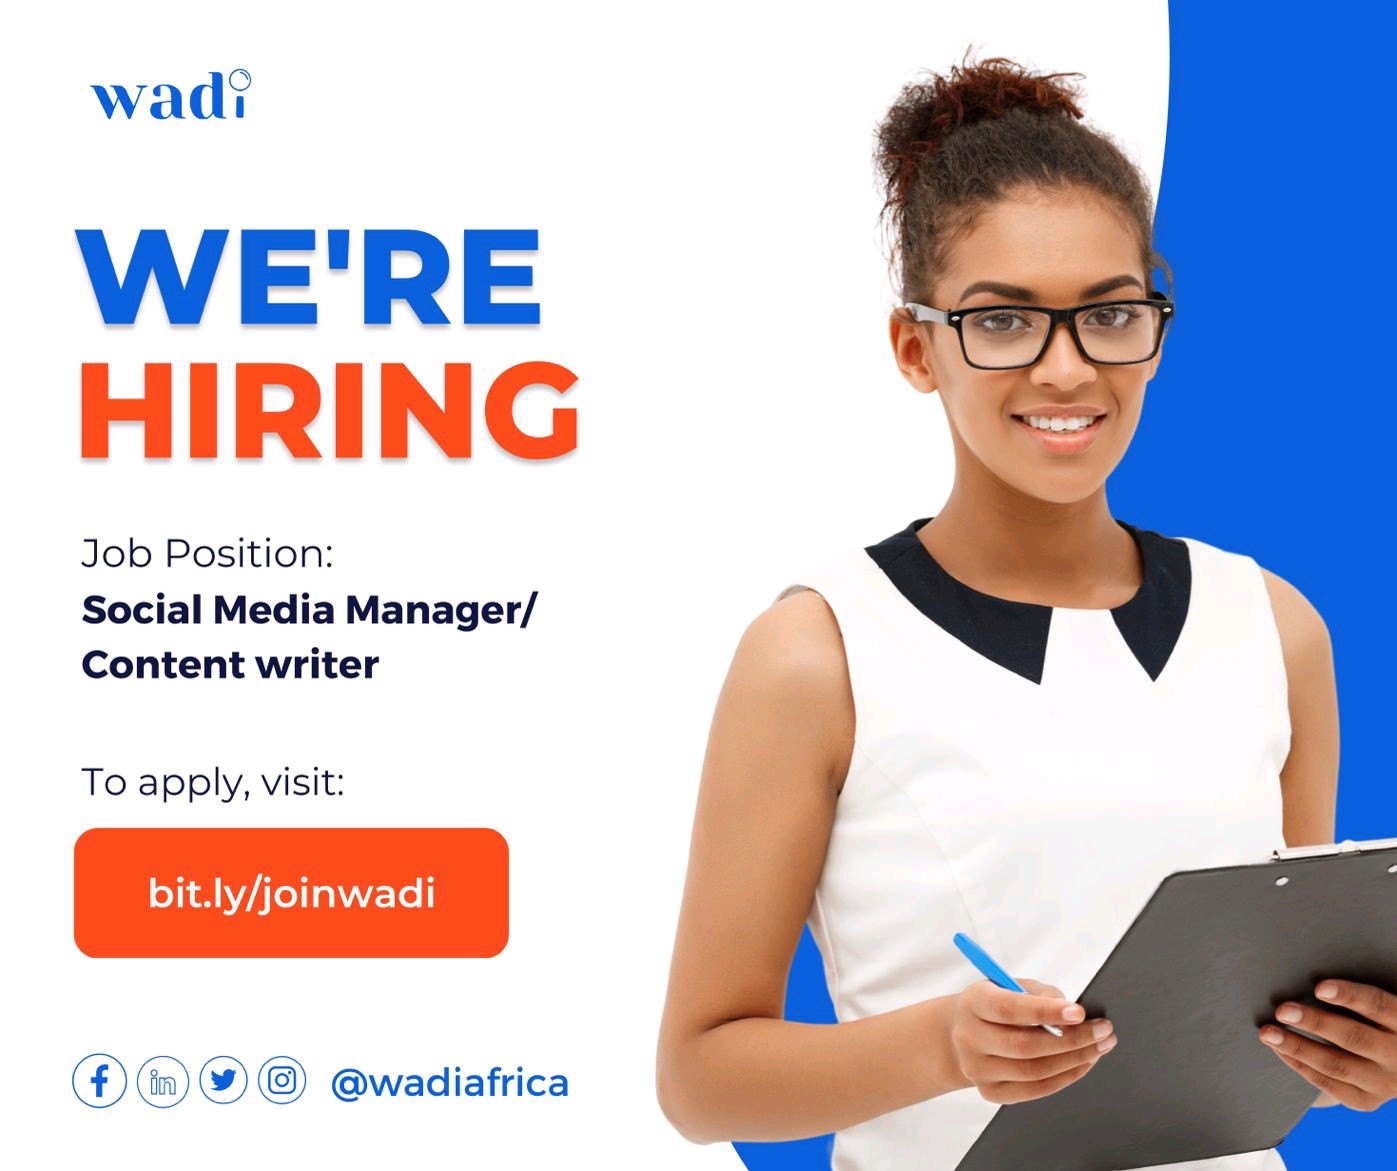 Wadi is Hiring Remote Social Media Manager/Content Writer